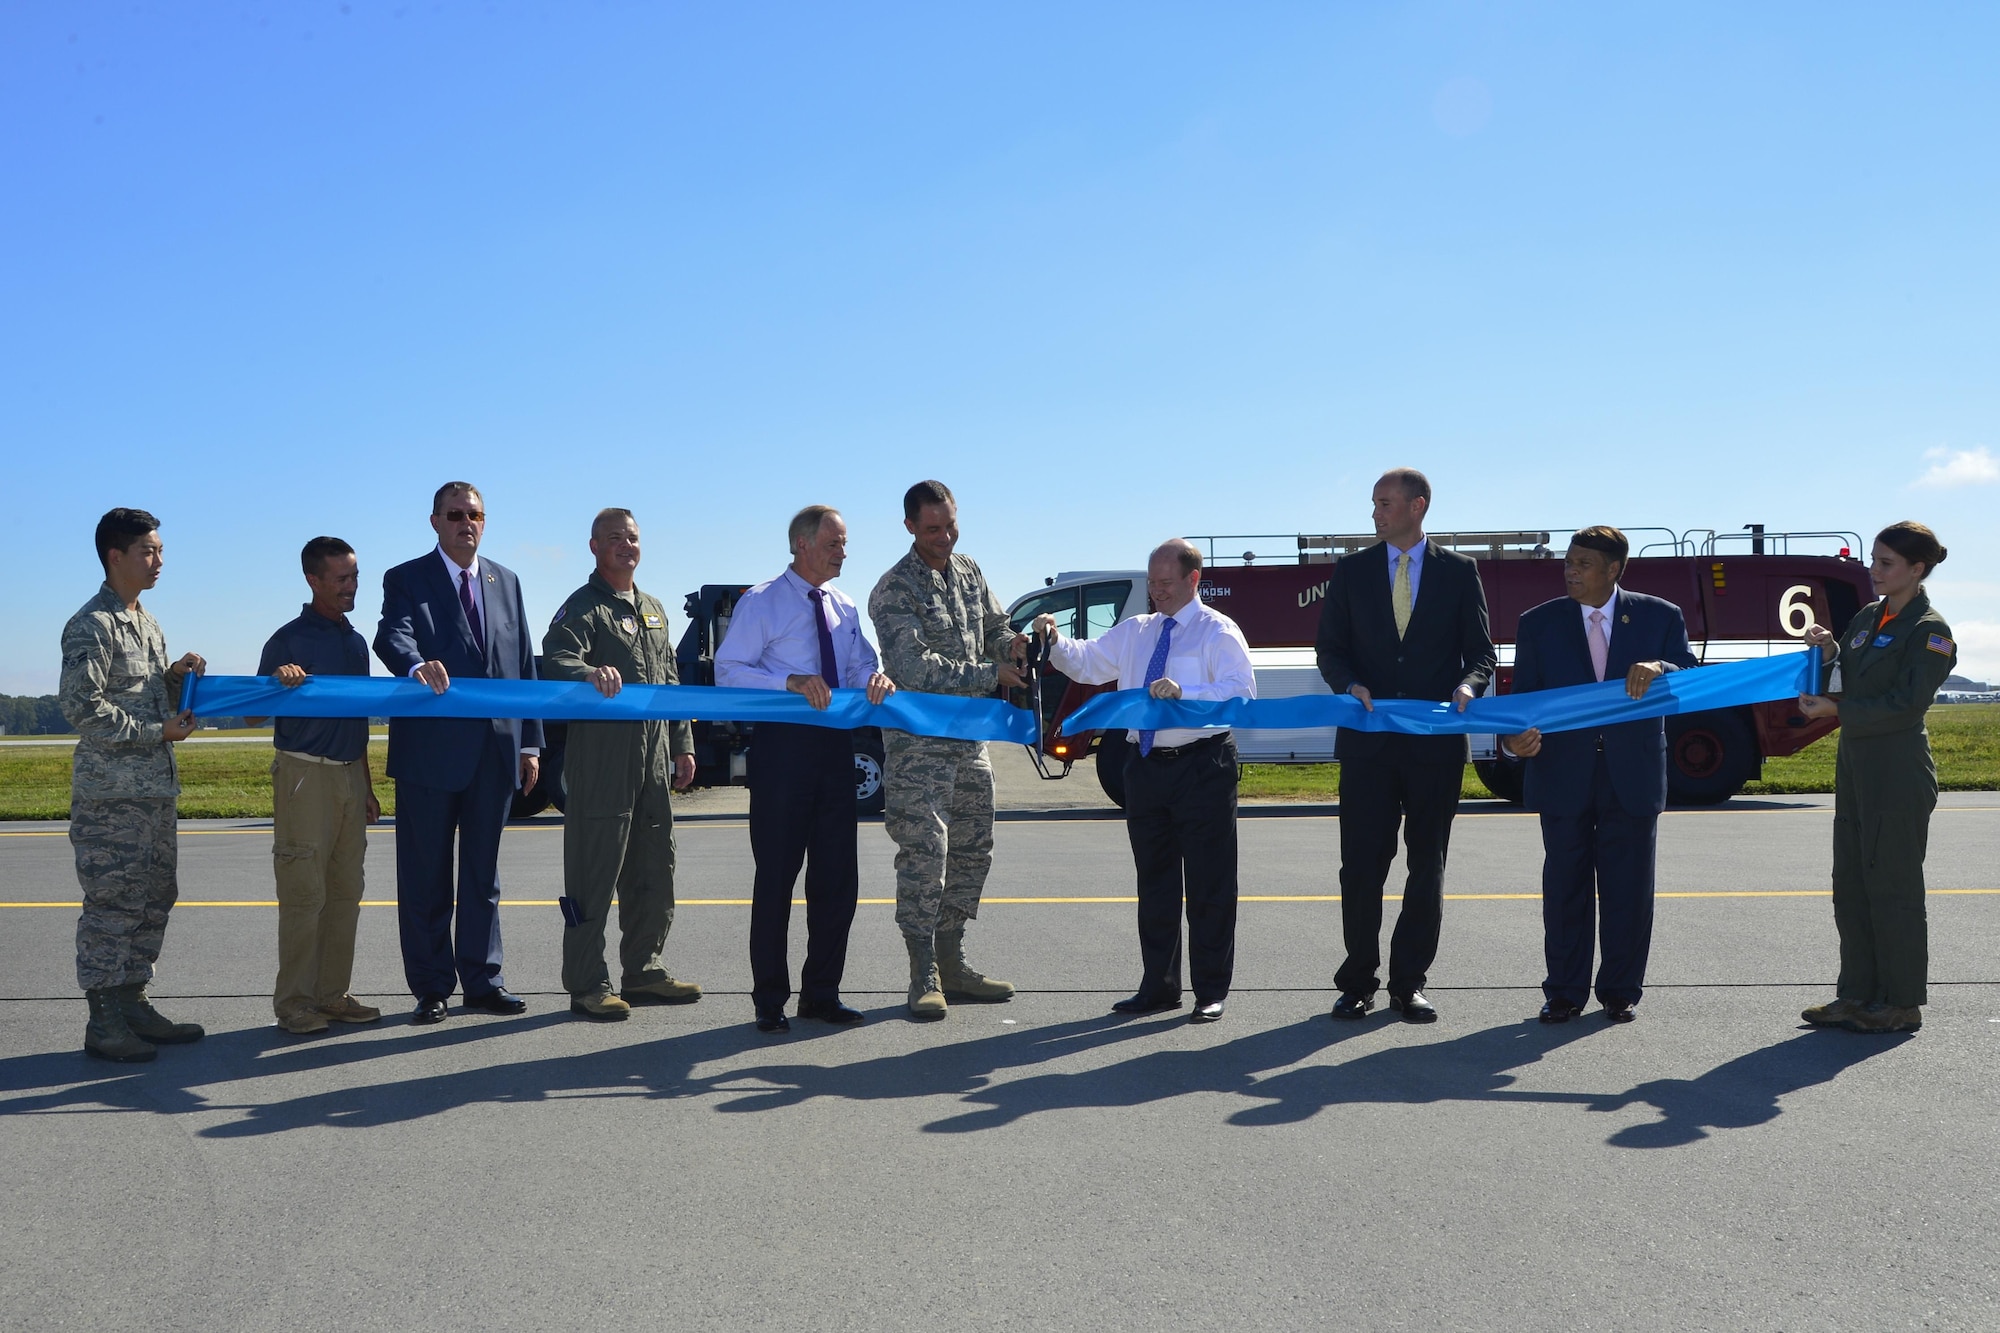 Col. Ethan Griffin, 436th Airlift Wing commander, and Sen. Chris Coons, D-Del.; cut a ribbon marking the reopening Runway 01-19 during an extensive reconstruction project Sept. 23, 2016, at Dover Air Force Base, Del. Shown from left, Airman 1st Class Joseph Cho, 436th Aircraft Maintenance Squadron; Tony Price, sub-contractor representative; Jeff Wagonhurst, Versar Inc. president and CEO; Col. Scott Durham, 512th AW commander; Sen. Tom Carper, D-Del.; Col. Ethan Griffin, 436th AW commander; Sen. Chris Coons, D-Del.; Drew Slater, Rep. John Carney D-Del. representative; Robin Christiansen, Mayor of Dover; and Airman 1st Class Paula Padilla, 9th Airlift Squadron loadmaster. (U.S. Air Force photo by Senior Airman William Johnson) 